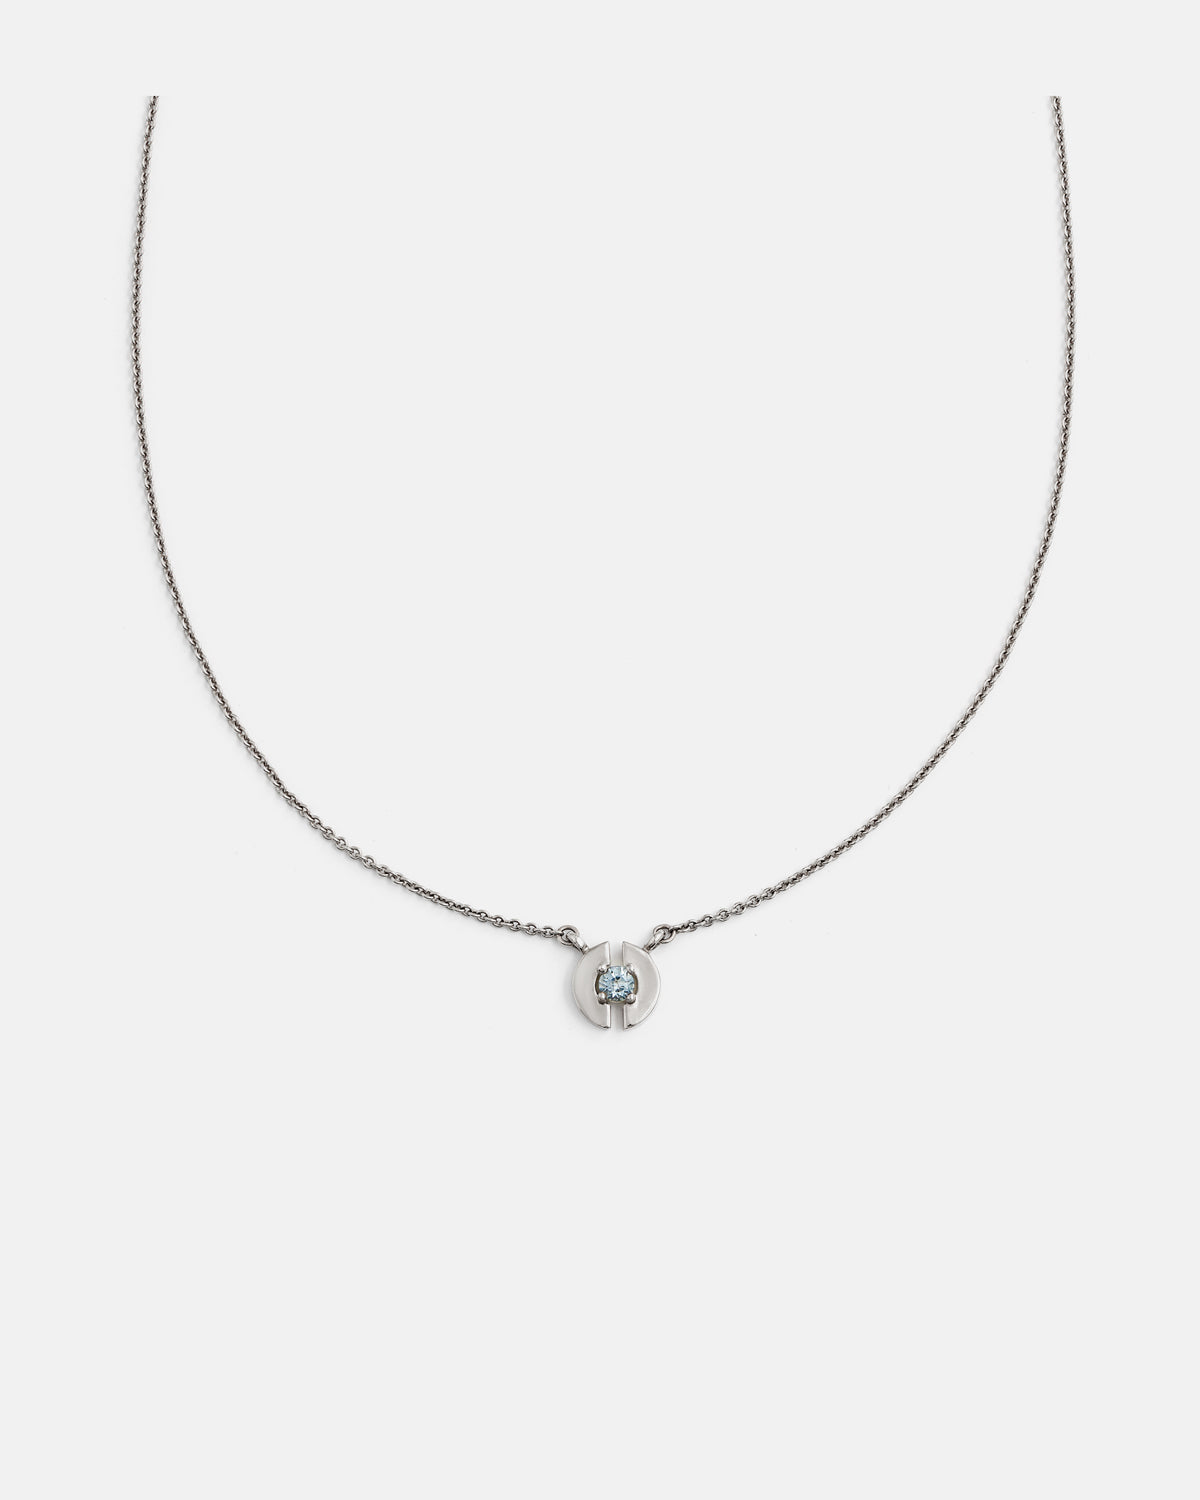 Stein Necklace in Silver with Aquamarine